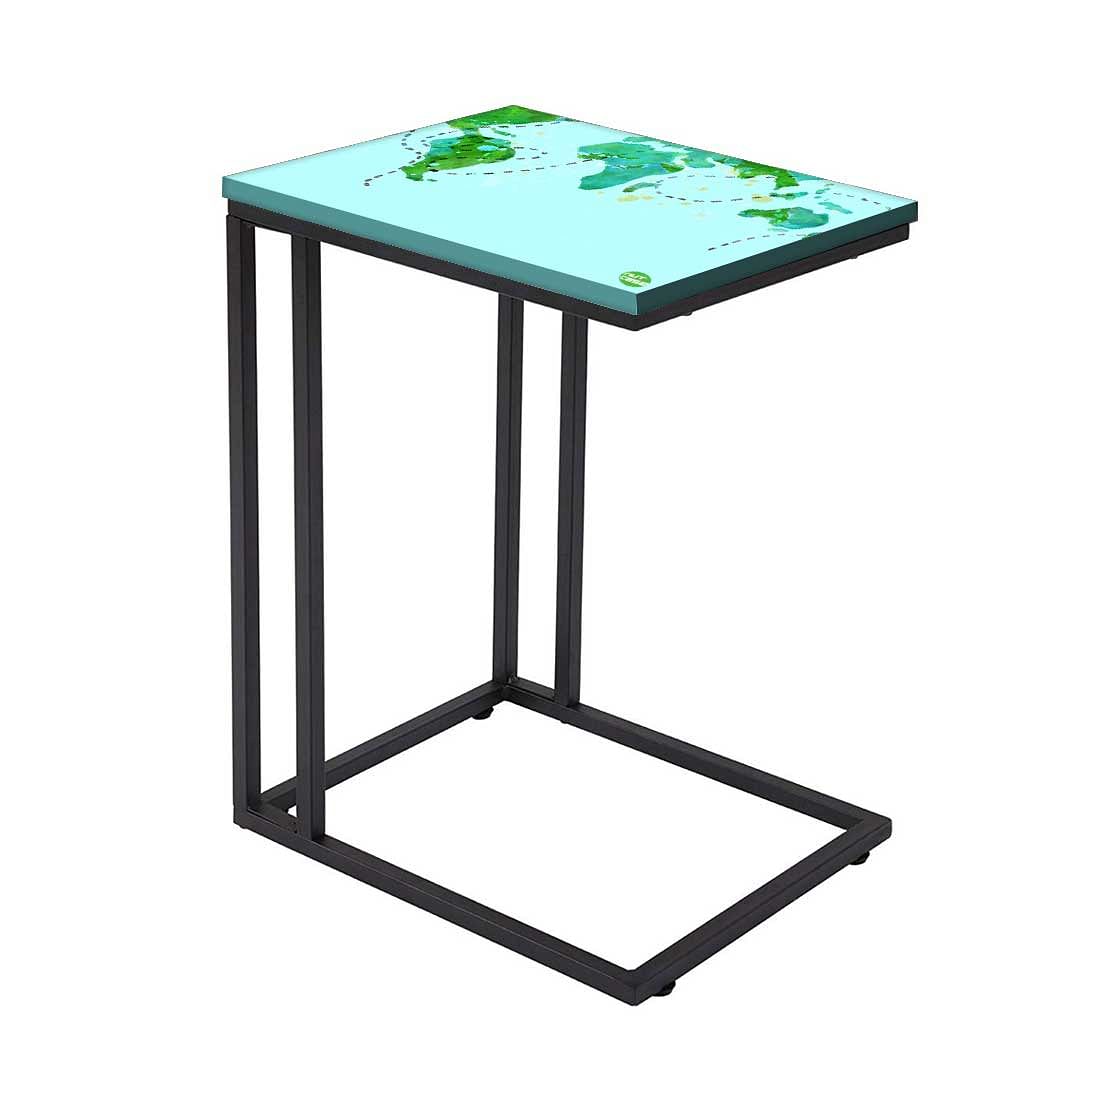 Nutcase Design C Shaped Side Table for Laptop Work on Sofa Couch-Study Breakfast Snack Serving End Tables -_Sky Blue Map Design Nutcase